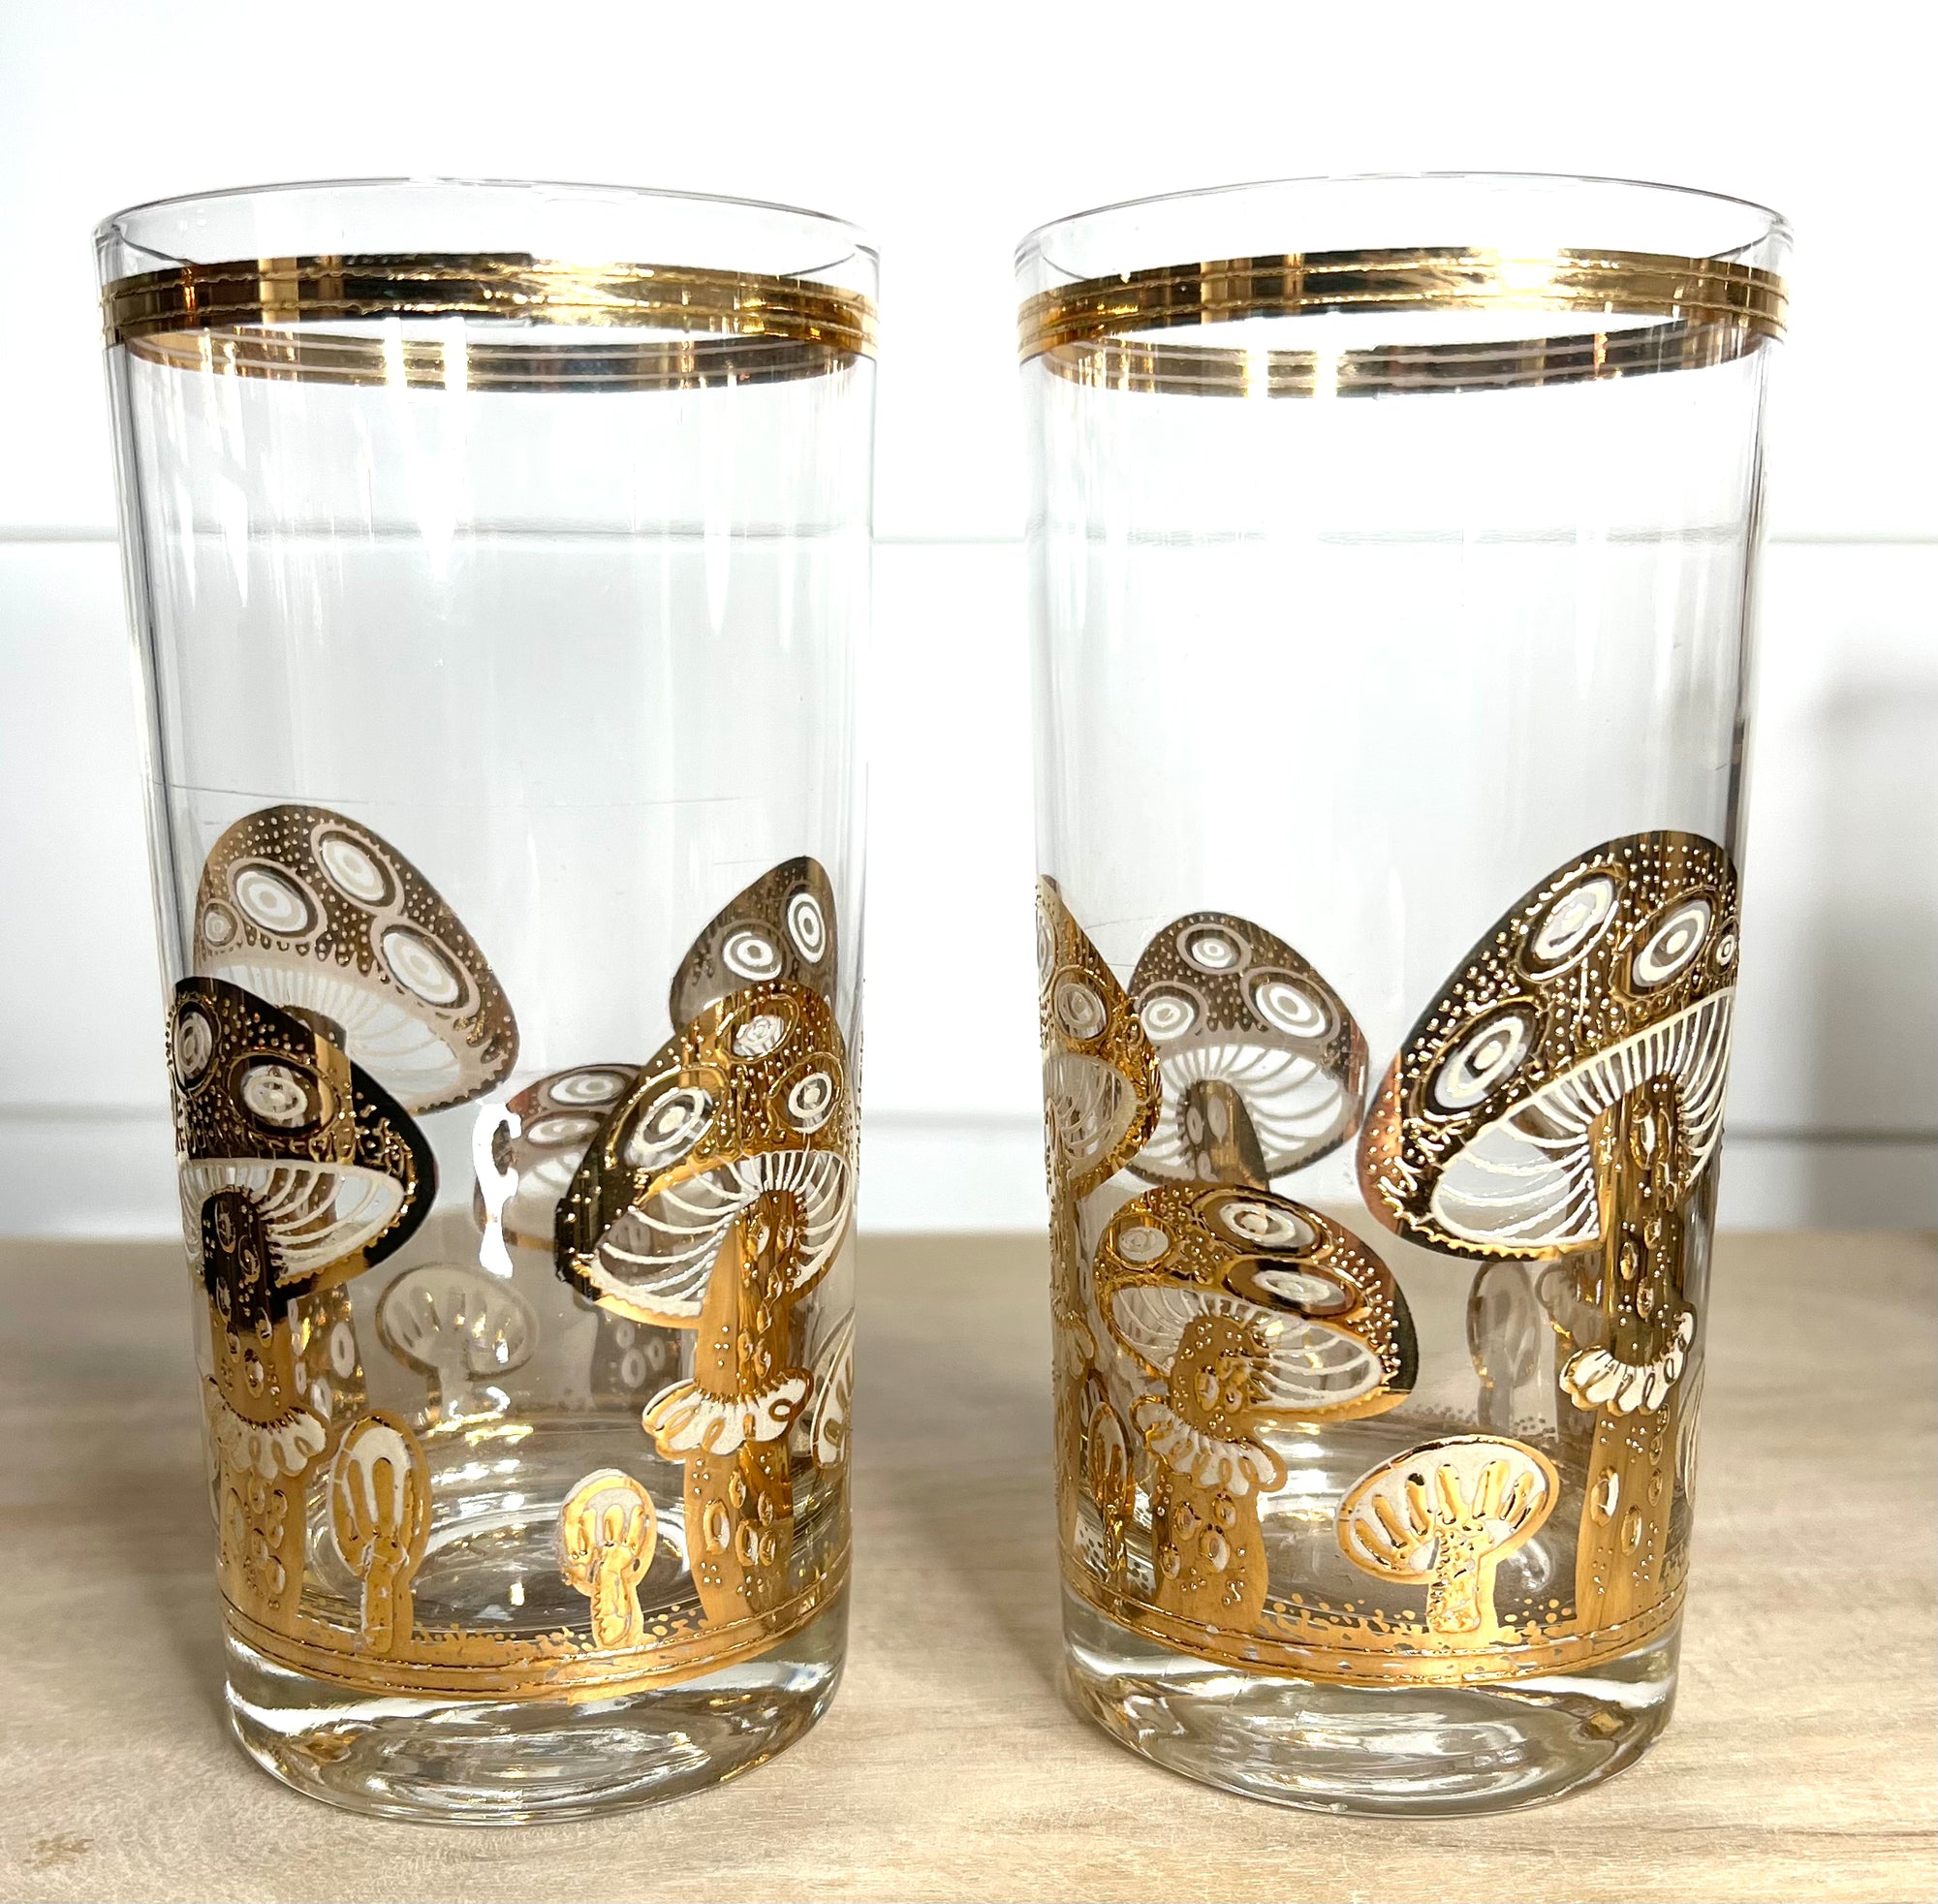 4 Vintage Etched Highball Glasses, 1950's, 12 oz Cocktail Whiskey